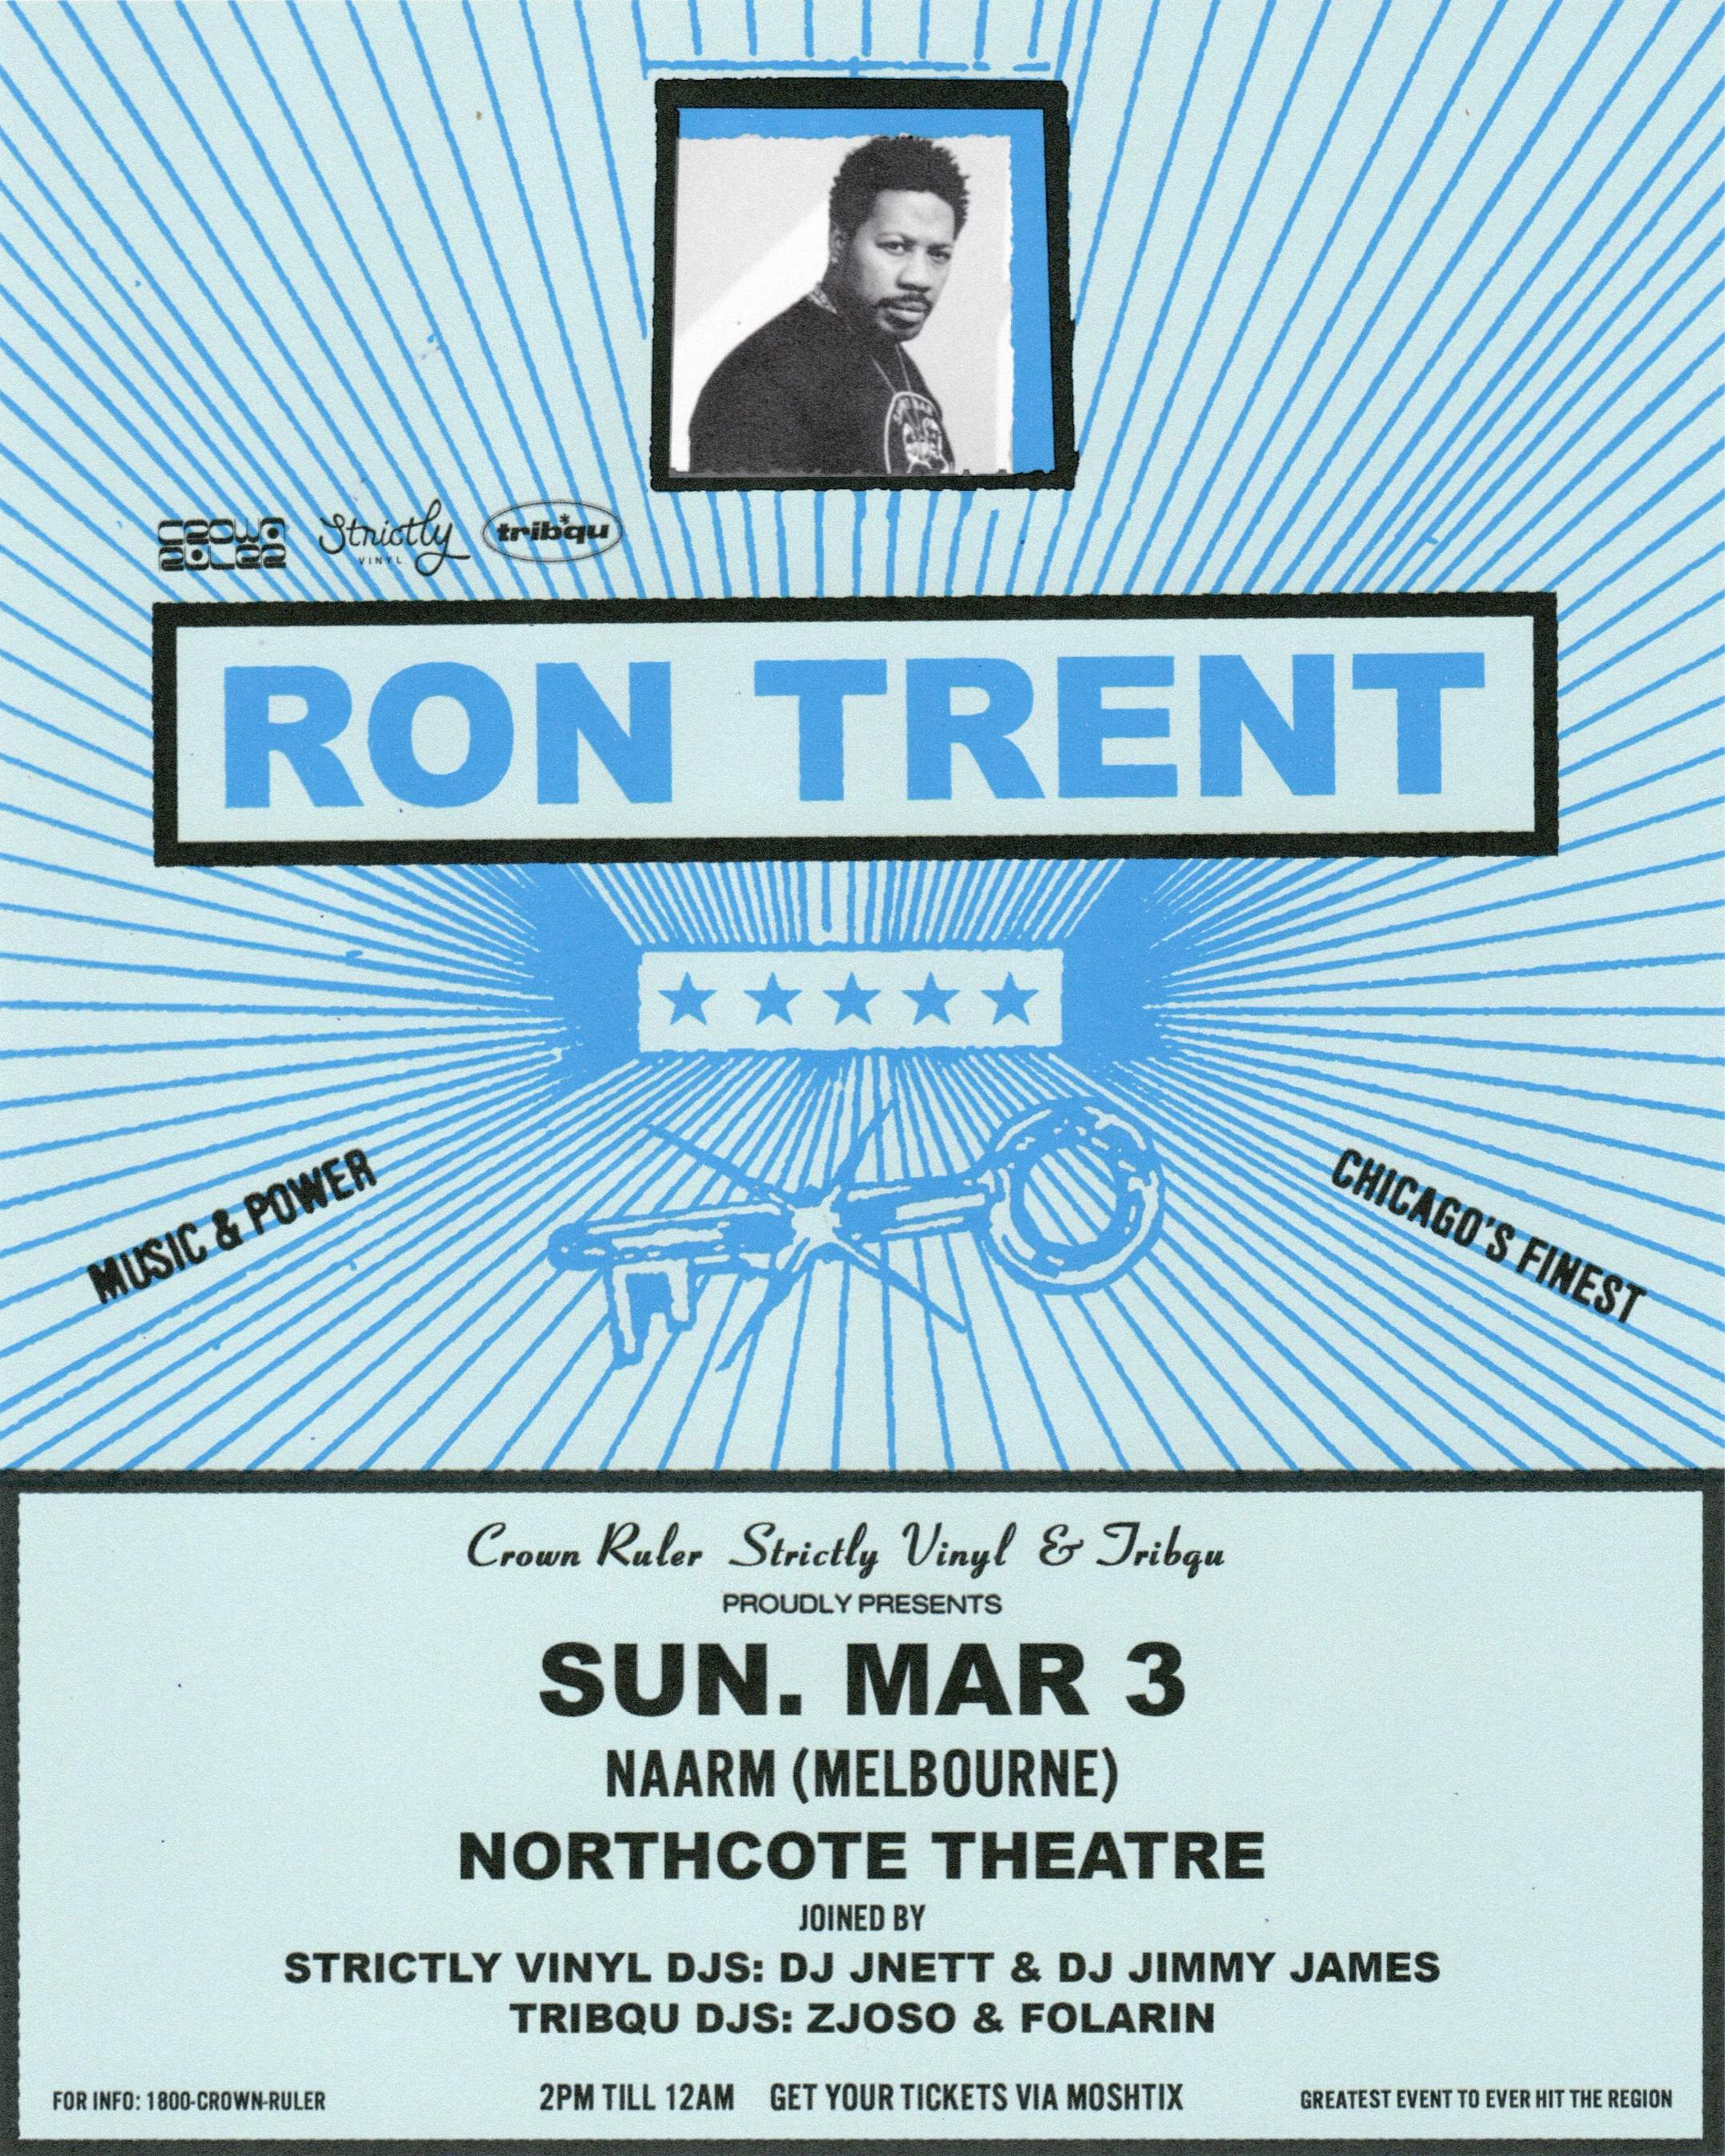 Crown Ruler, Strictly Vinyl & Tribqu proudly pres Ron Trent (Chicago) - フライヤー表